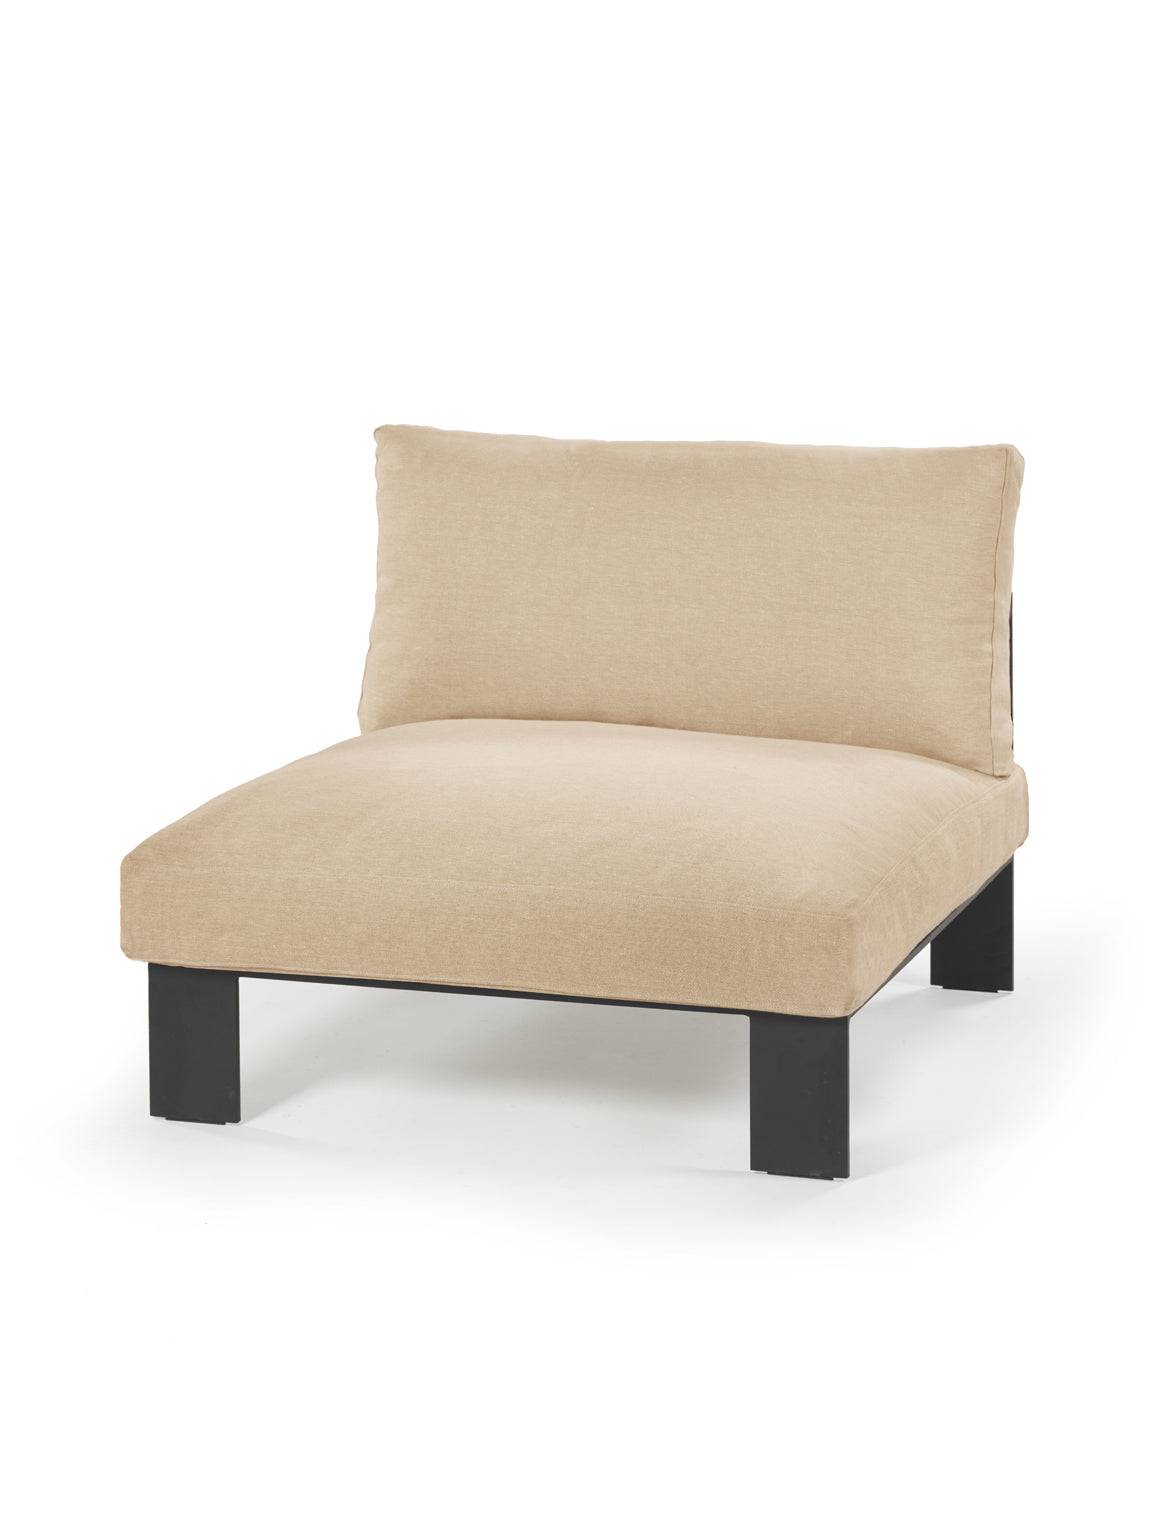 Mombaers Lounge Chair - Apricot - THAT COOL LIVING